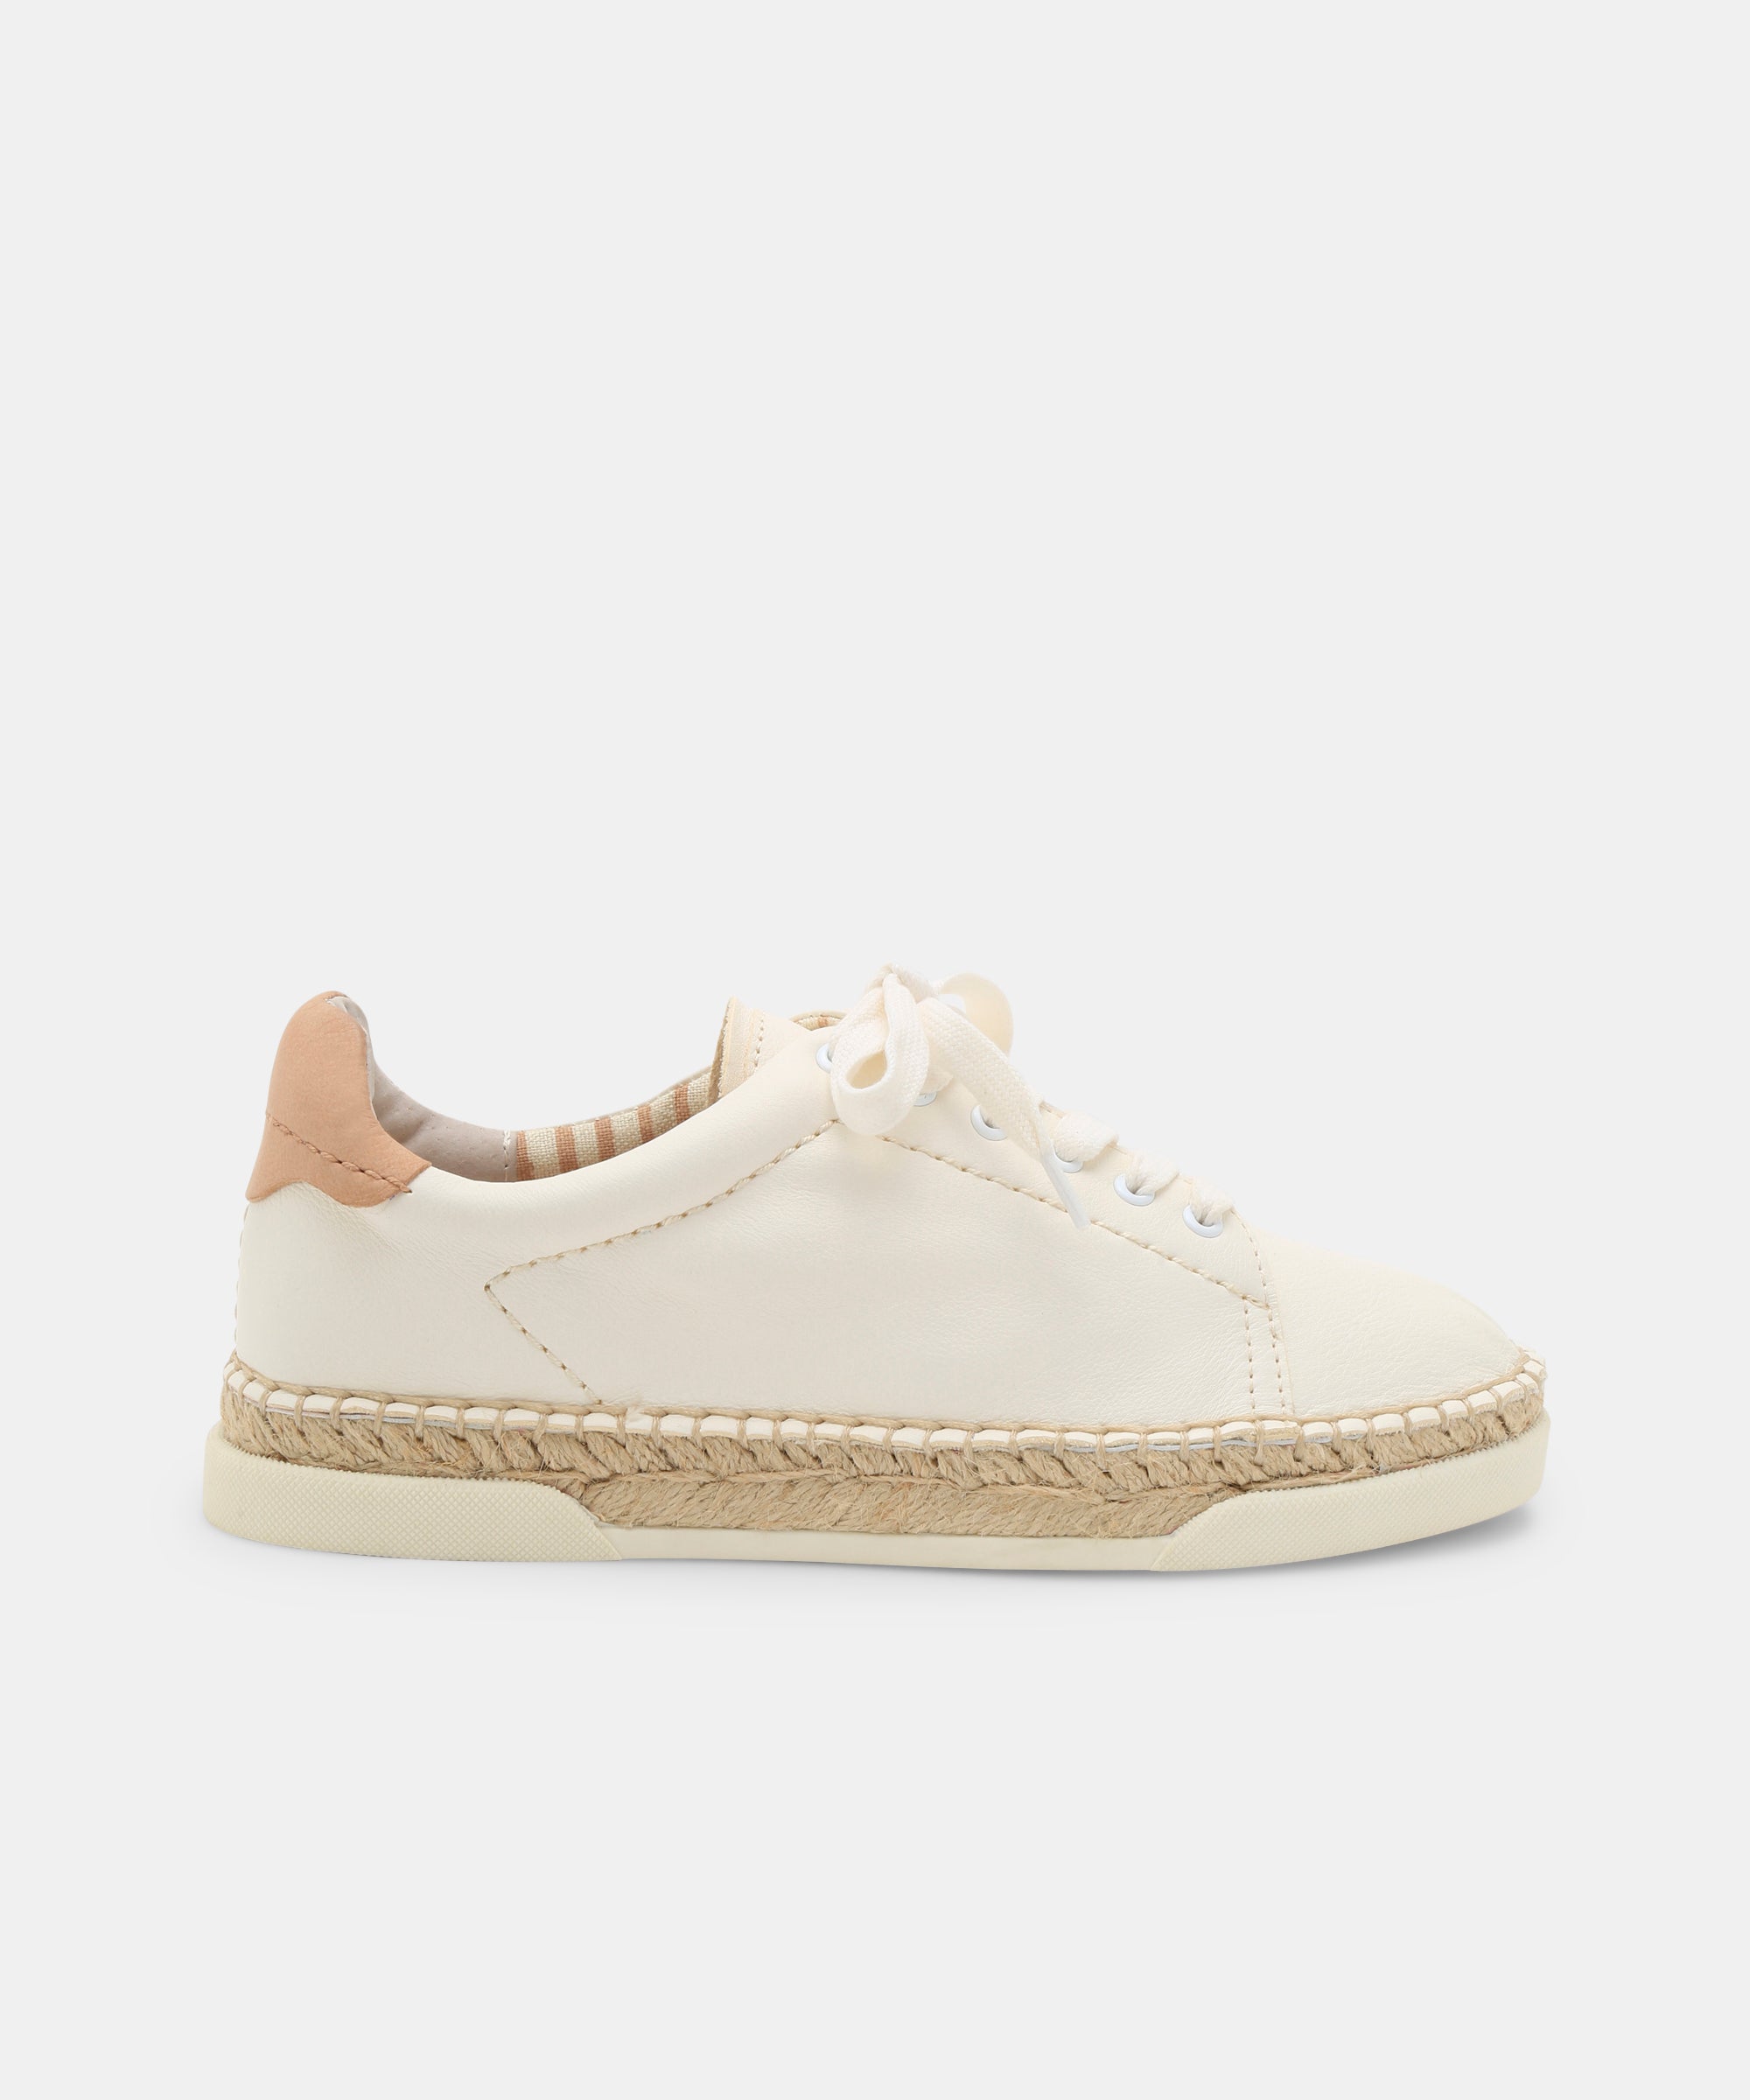 MADOX SNEAKERS IN WHITE – Dolce Vita